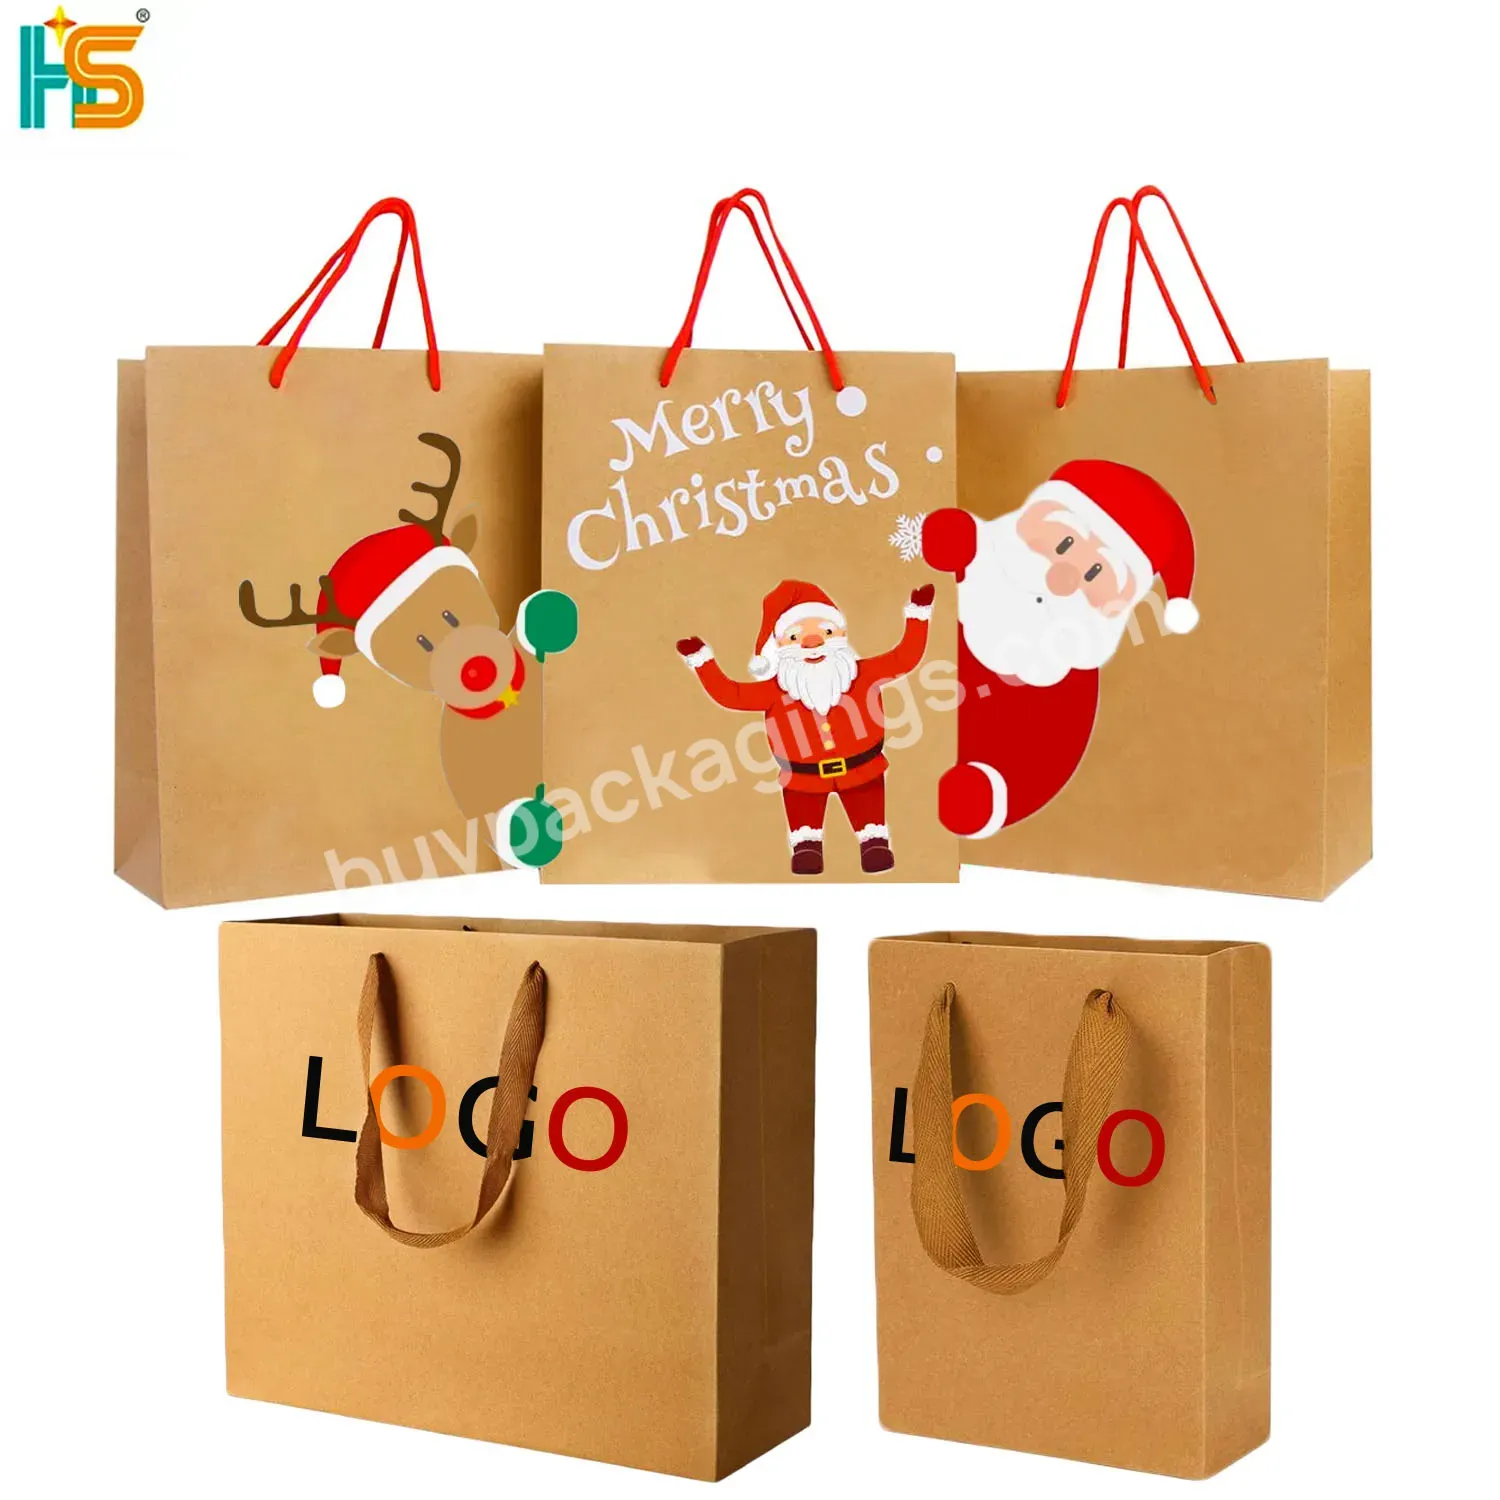 Factory Price Recyclable Kraft Brown Paper Bag With Rope Handle Your Logo Flat Handle Kraft Paper Bag - Buy Kraft Brown Paper Bags,Recyclable Kraft Paper Bag,Flat Handle Kraft Paper Bag.